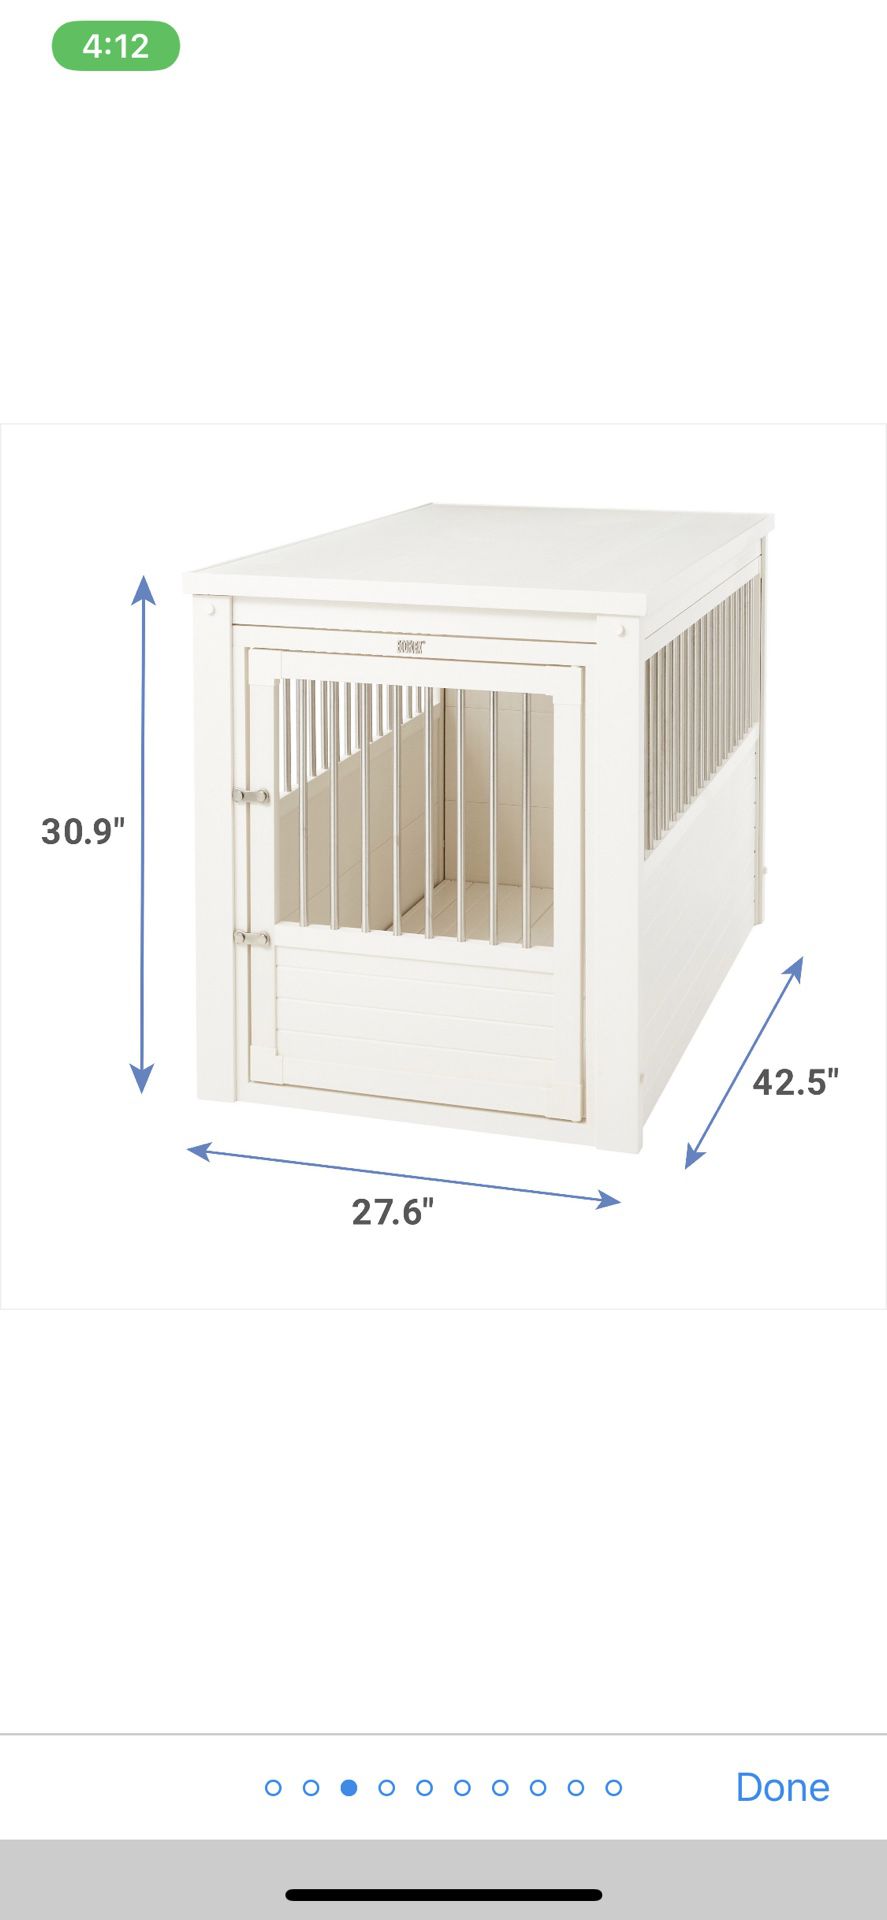 Crate for dog